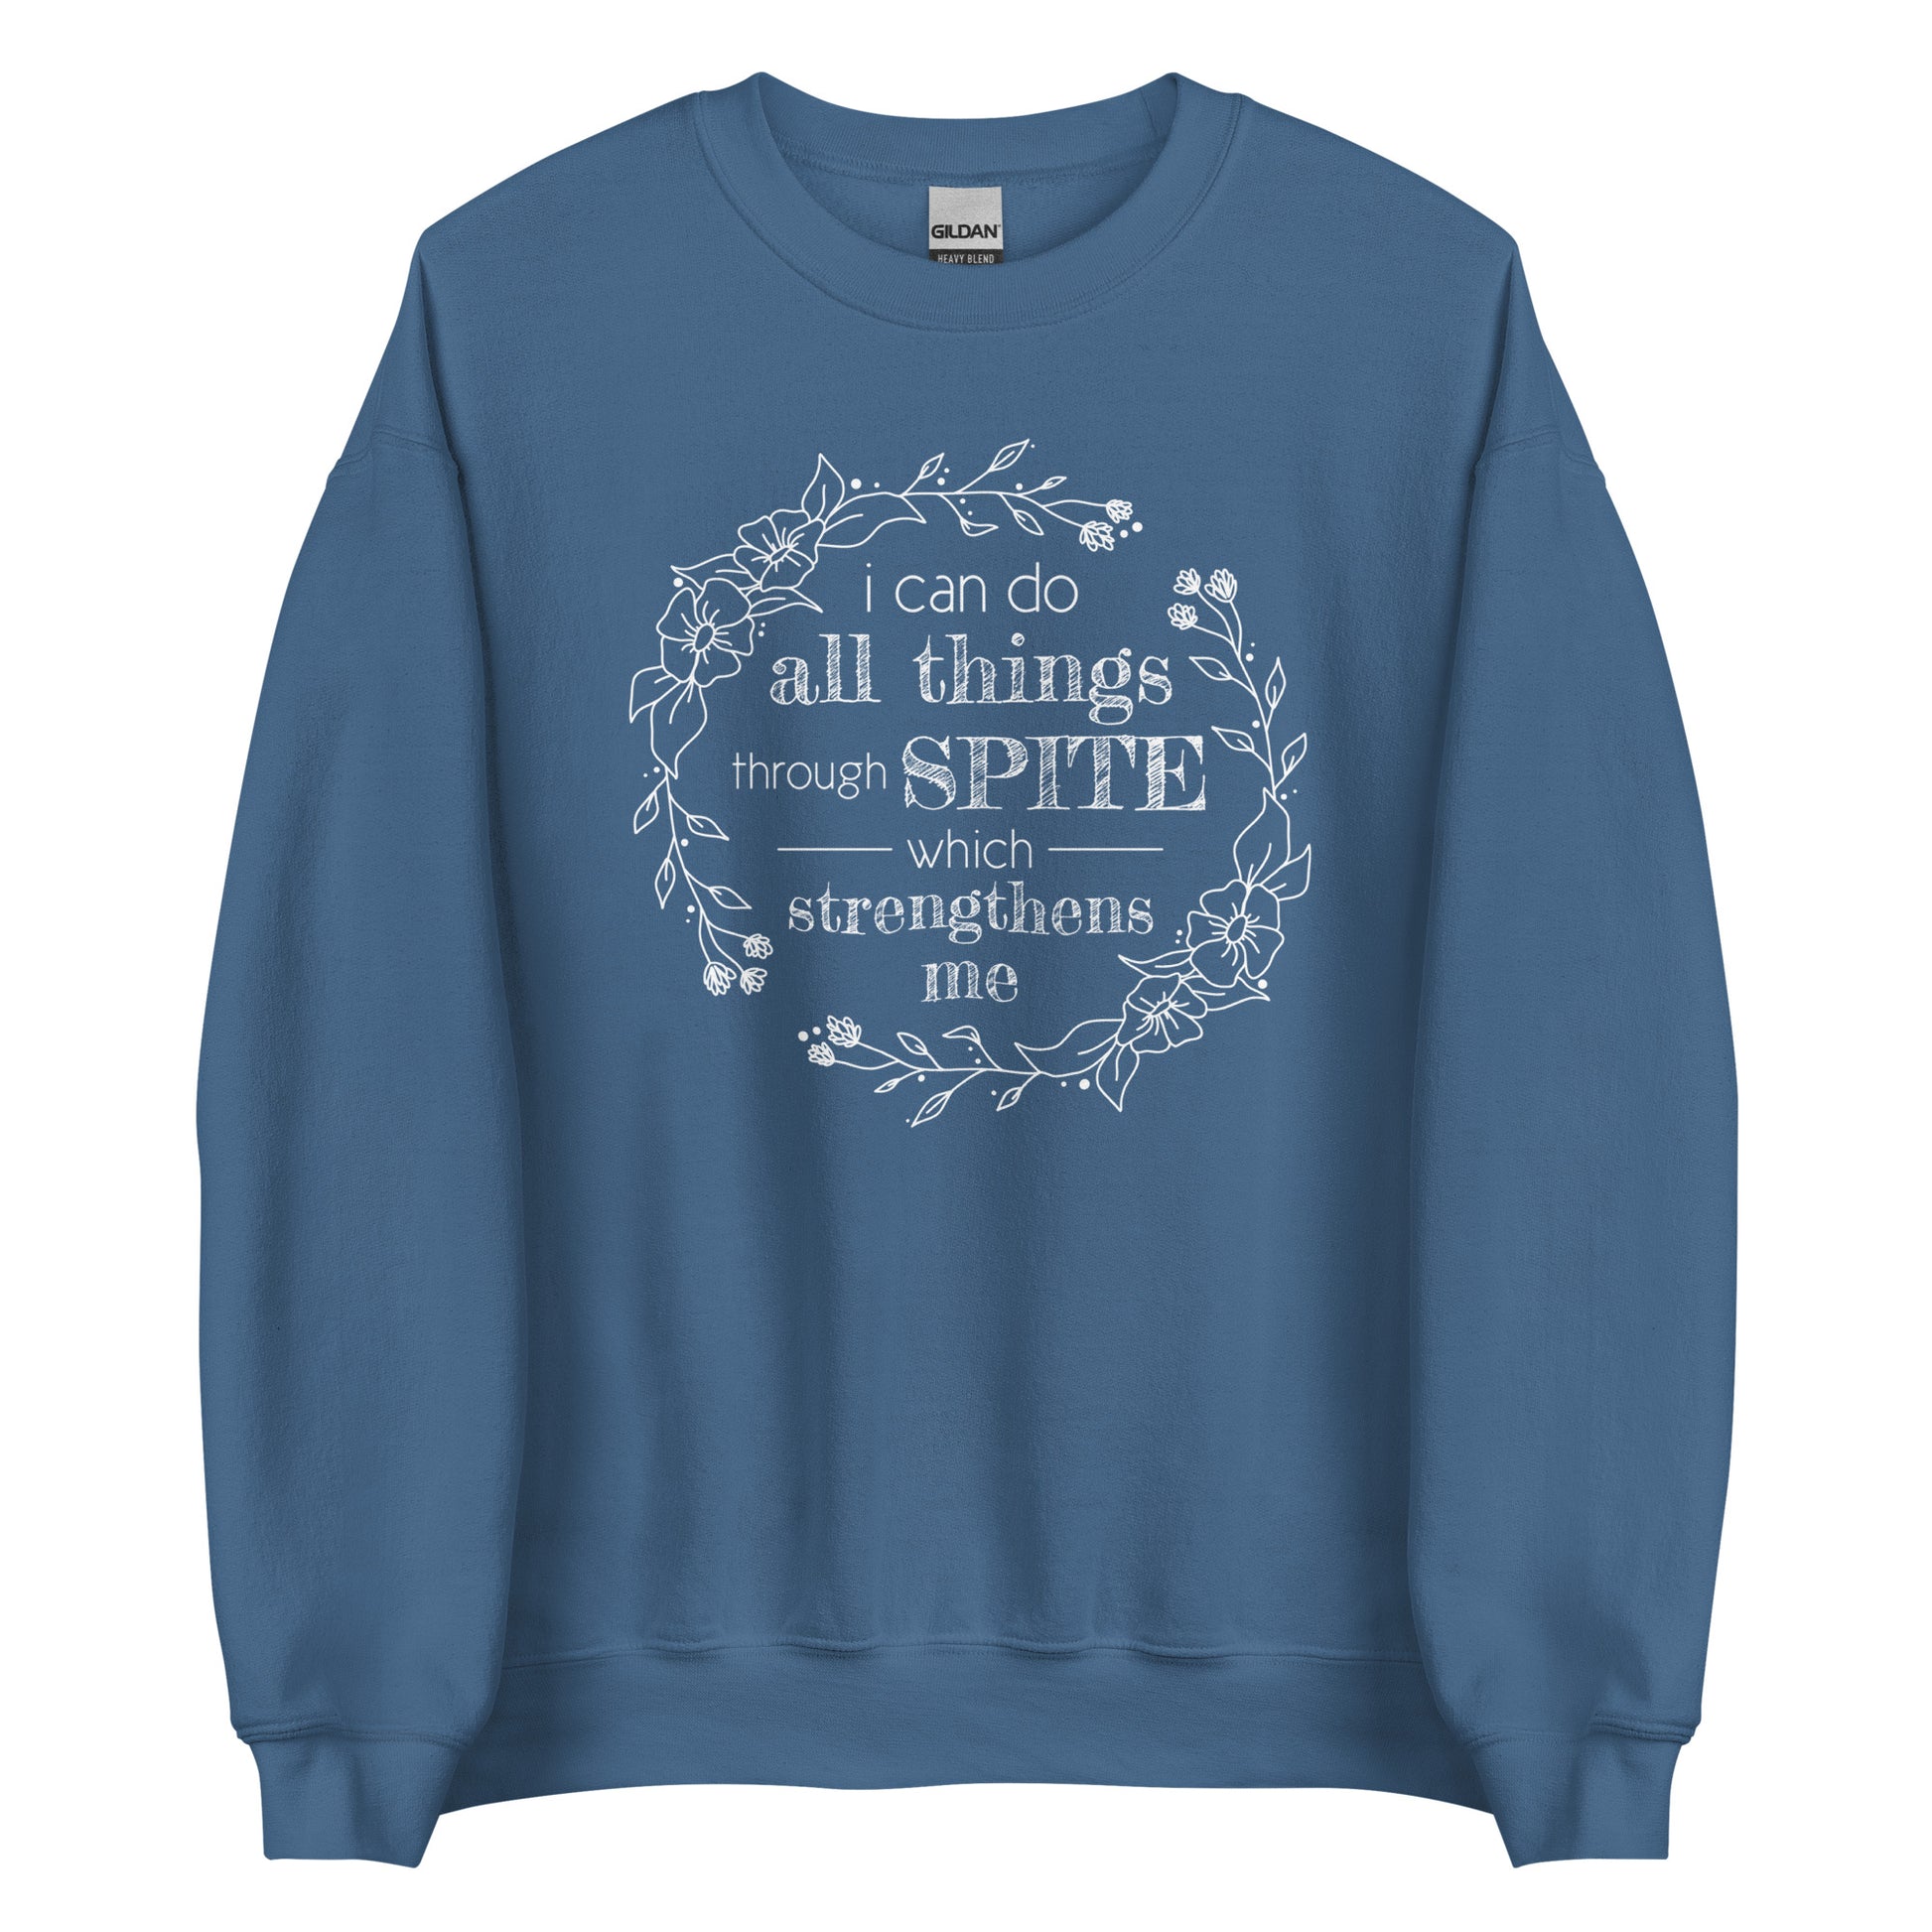 A blue crewneck sweatshirt featuring an illustration of a floral wreath. Text inside the flowers reads "i can do all things through SPITE which strengthens me"